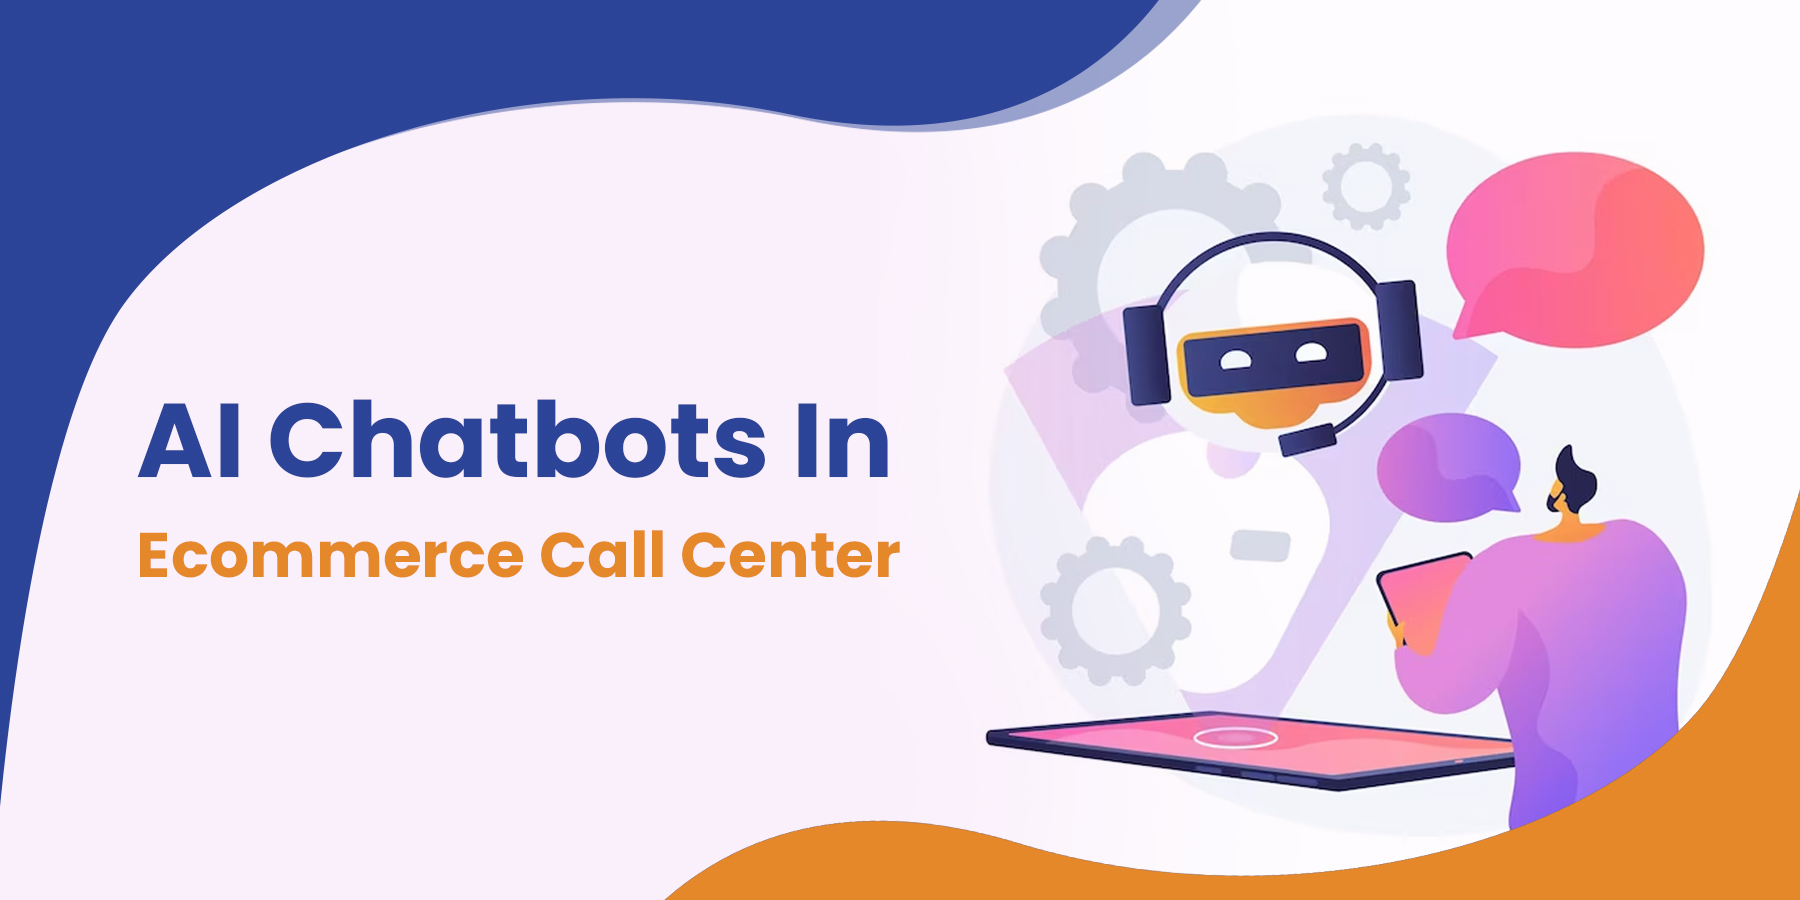 AI Chatbots In Ecommerce Call Center